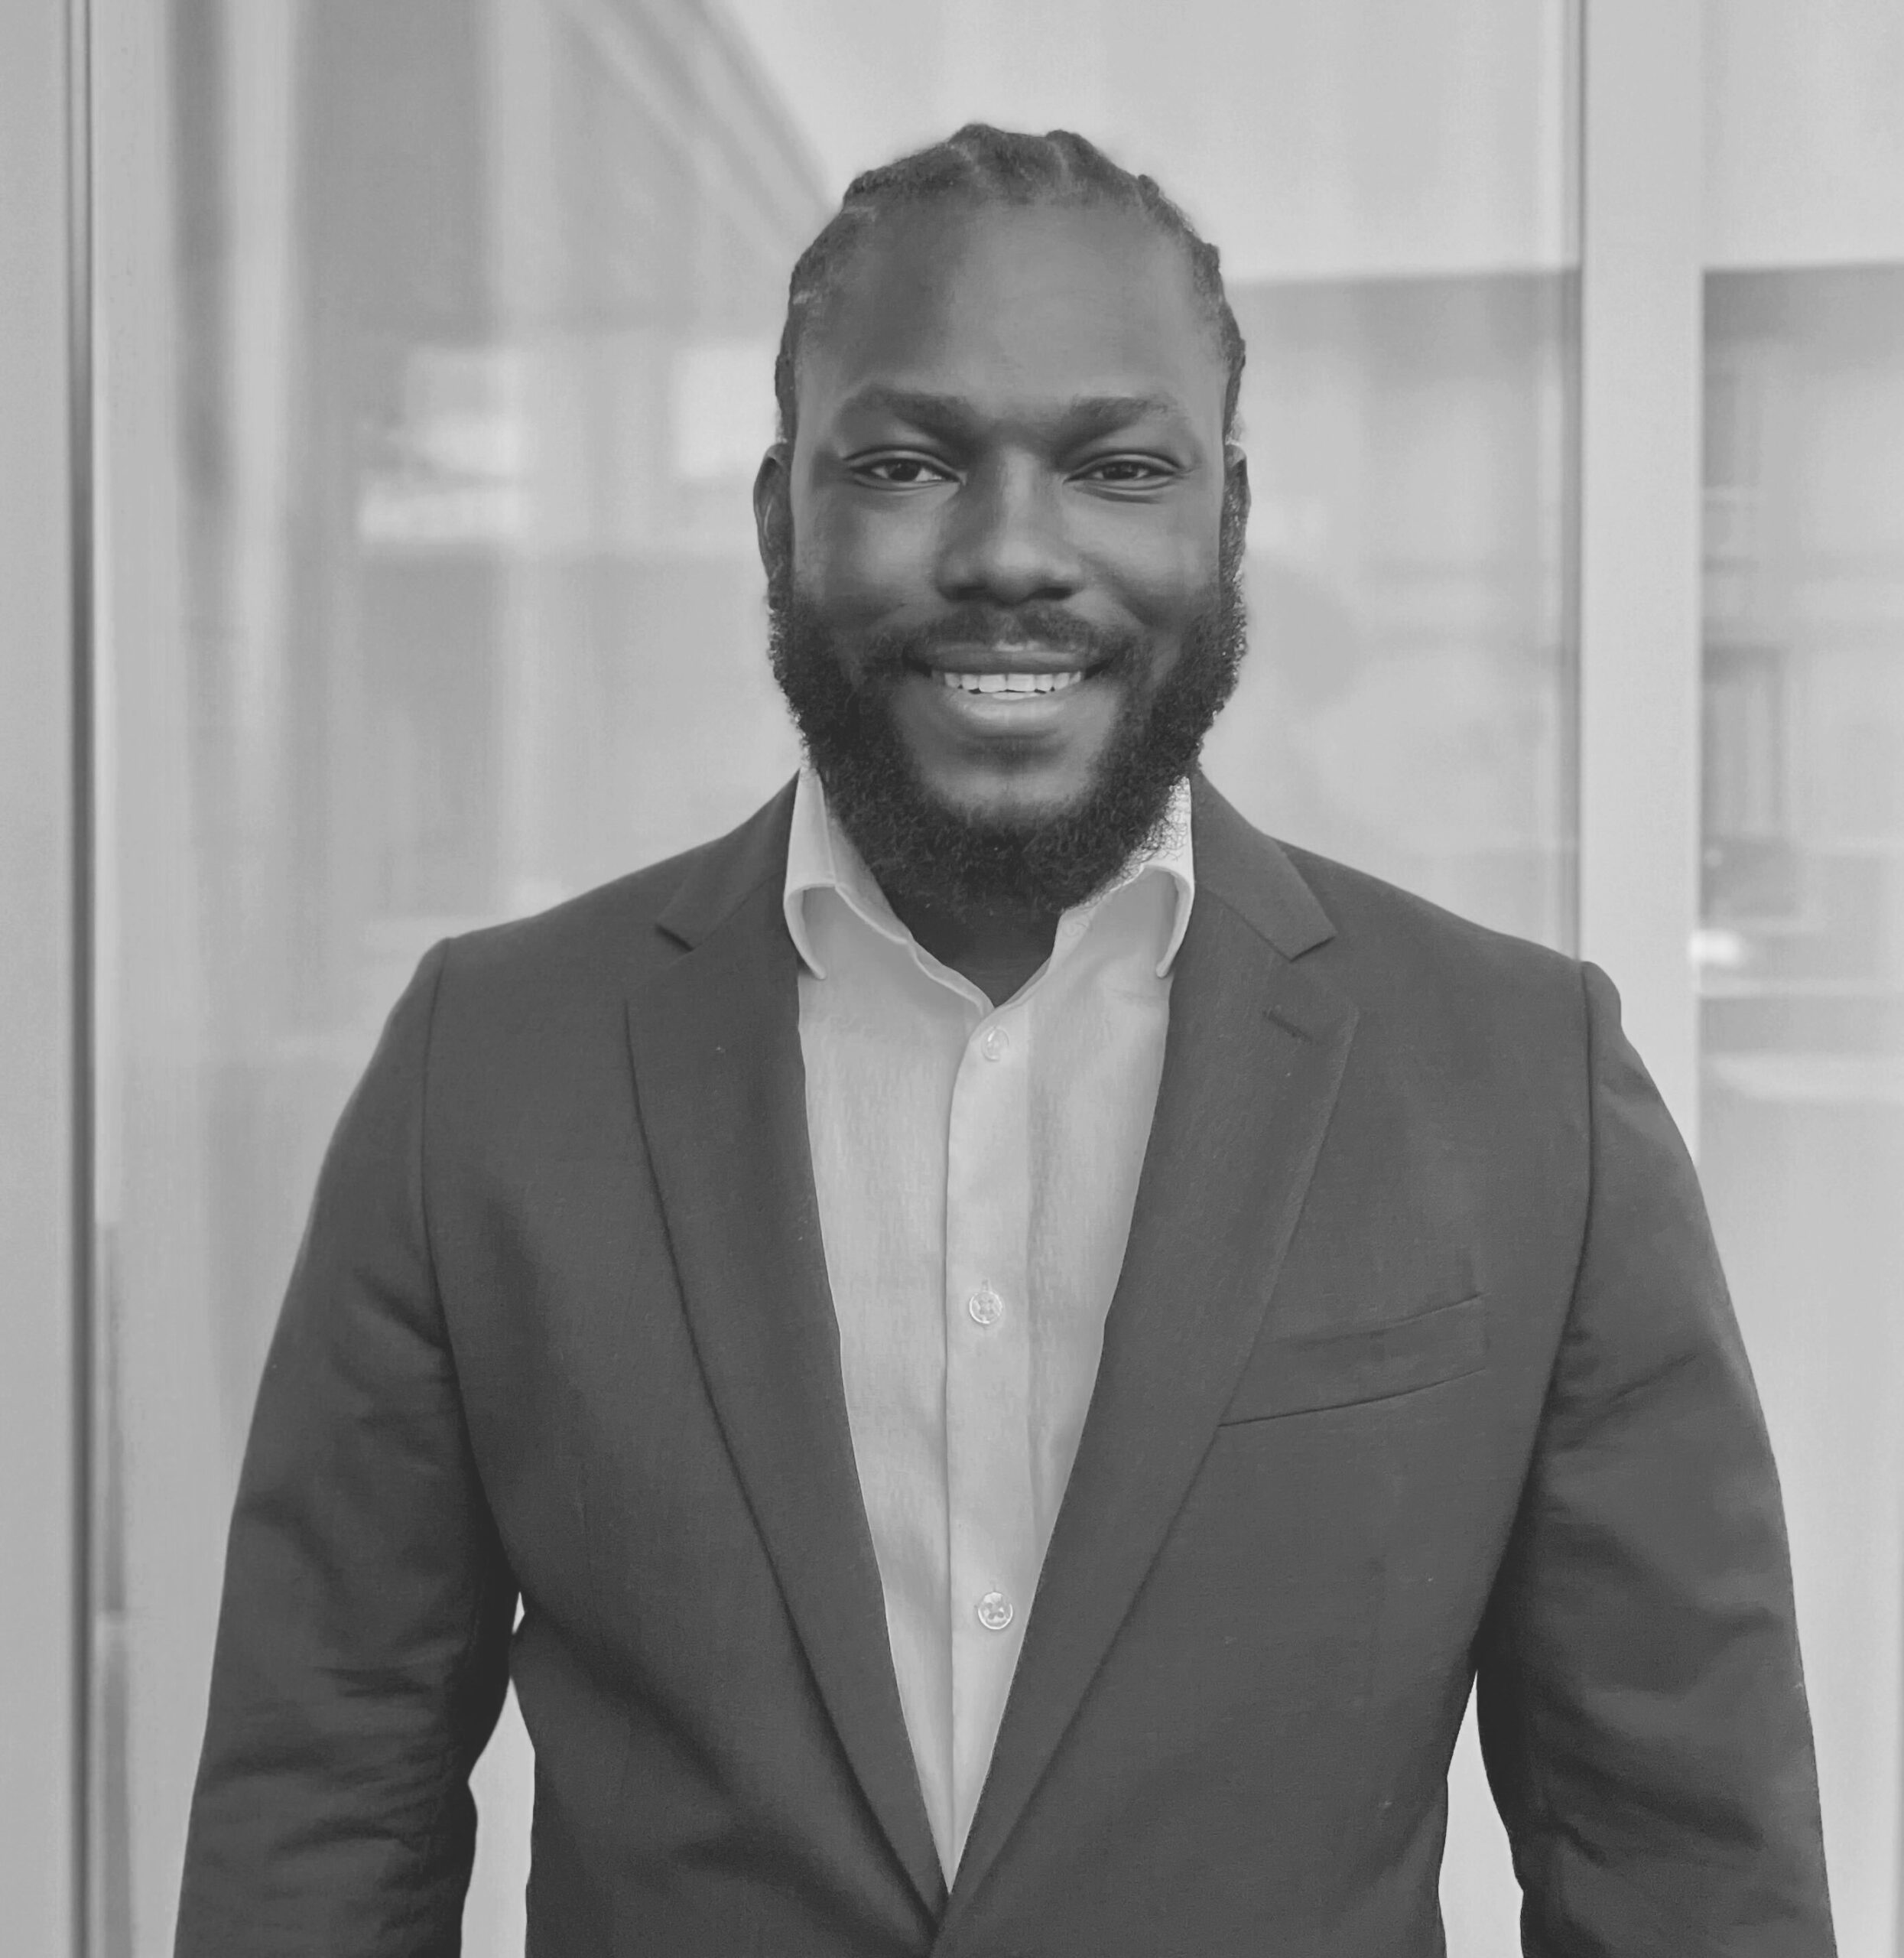 Annex Pro Welcomes Julius Kuyoro, as Technical Solutions Architect